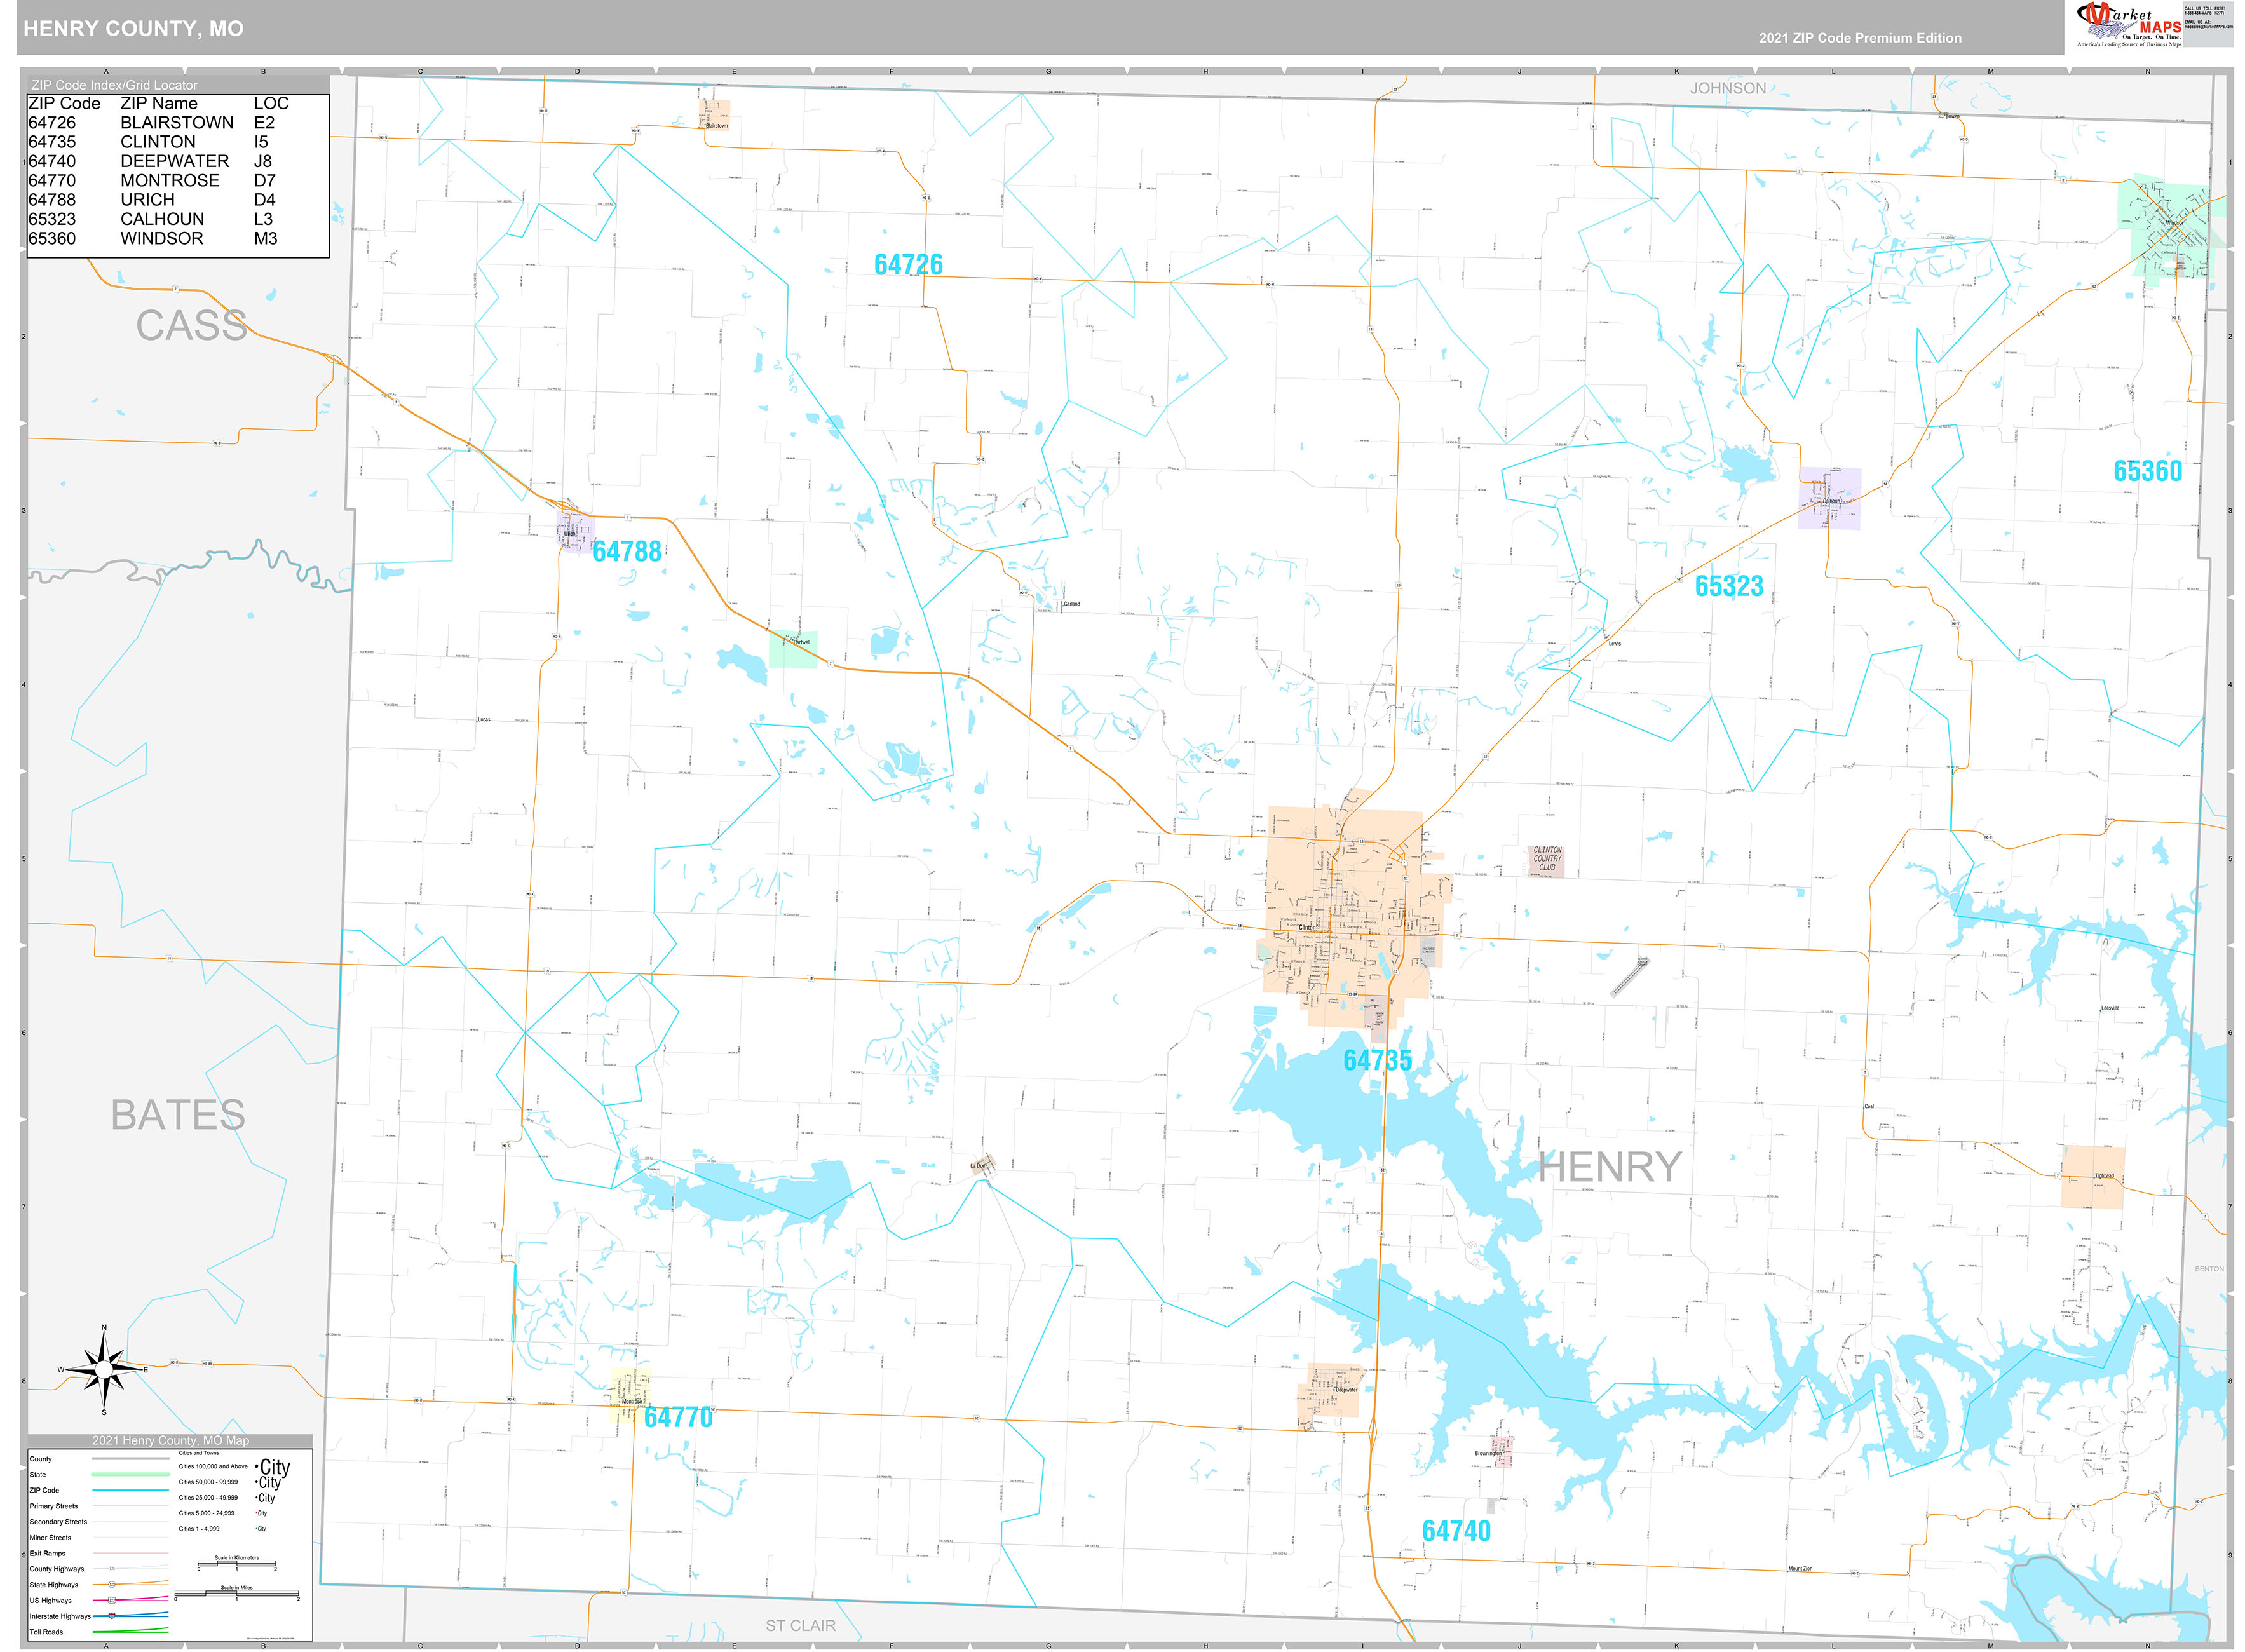 Henry County, MO Wall Map Premium Style by MarketMAPS MapSales